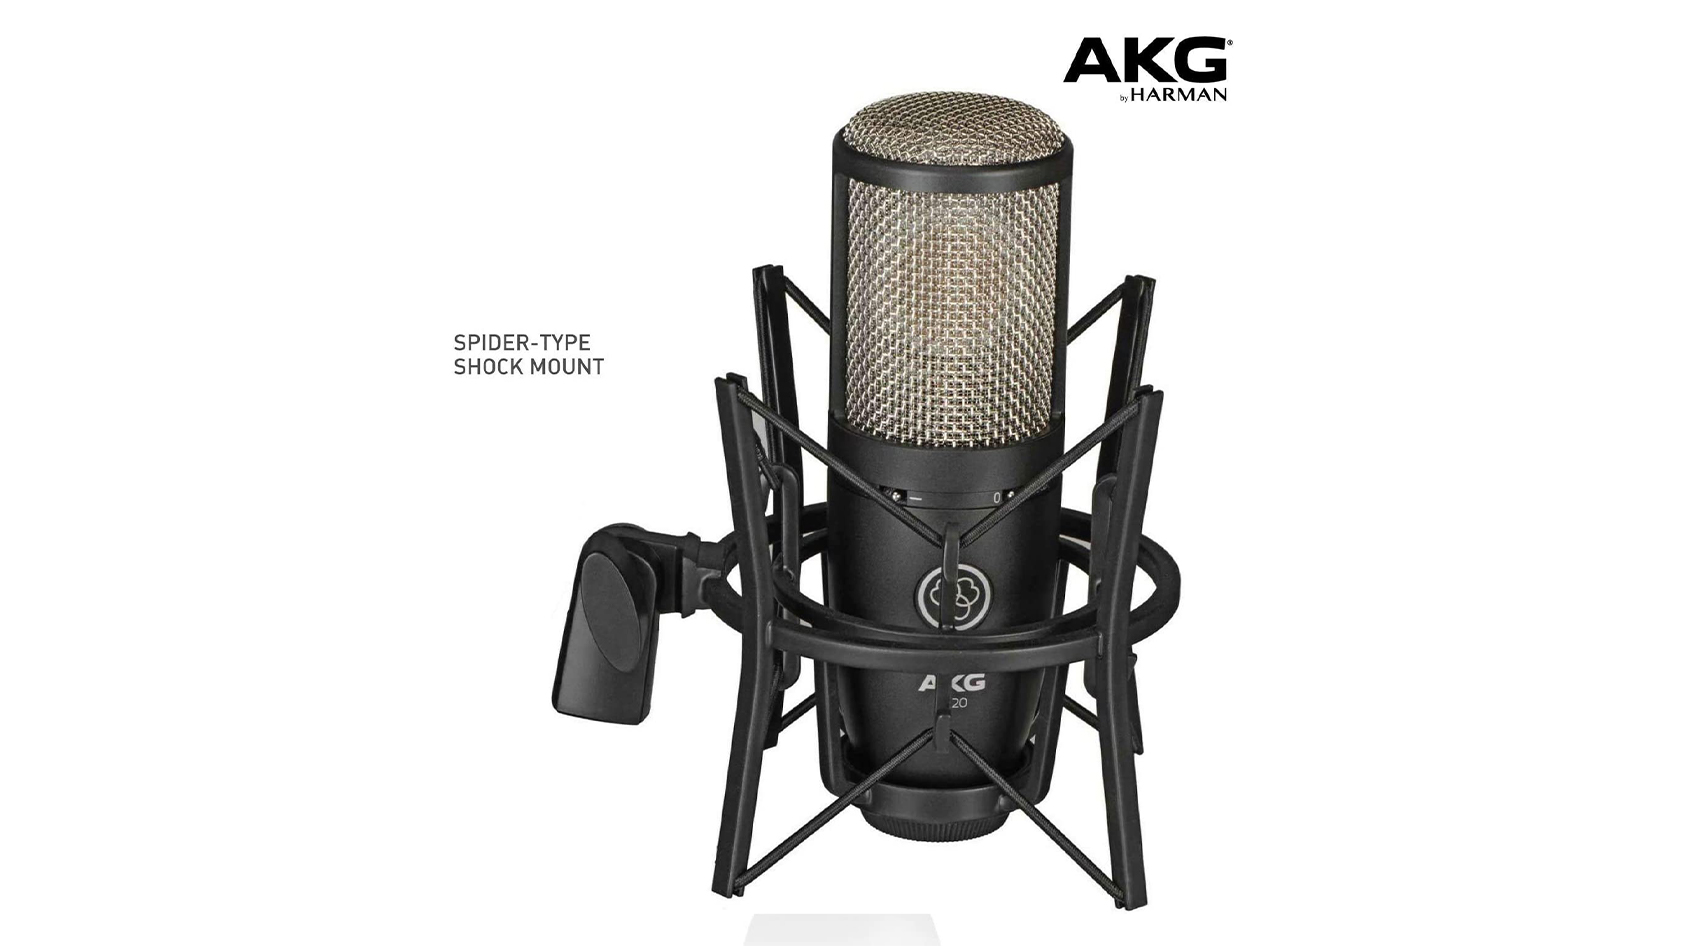 A product image of the AKG P420 XLR microphone suspended against a white background.